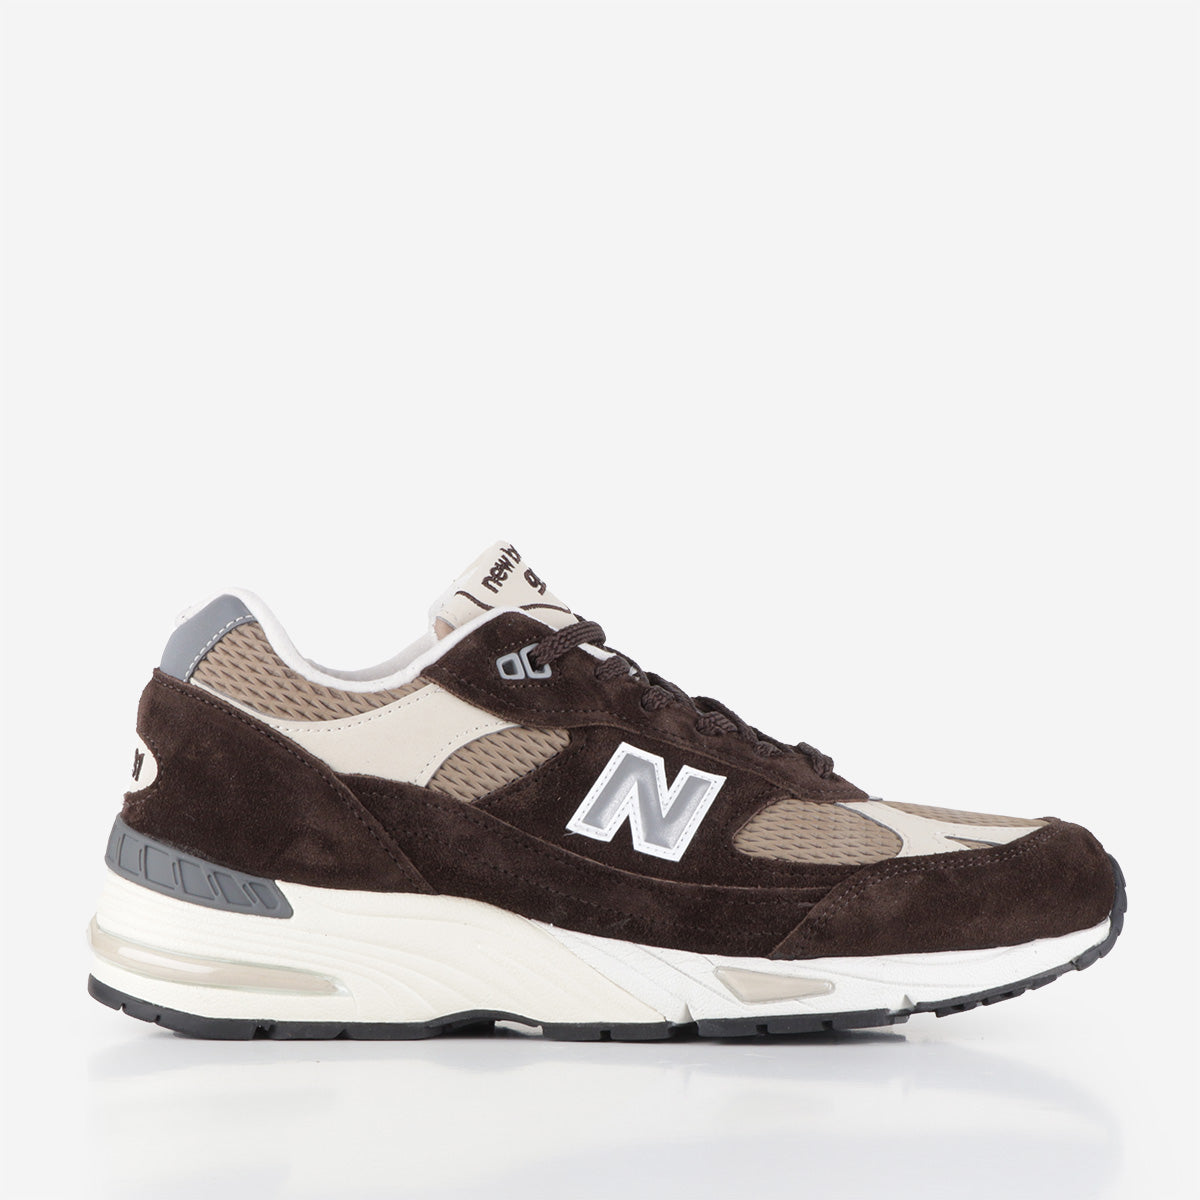 New Balance M991BGC 'Finale' Shoes, Delicioso Silver Mink Oyster Grey, Detail Shot 1